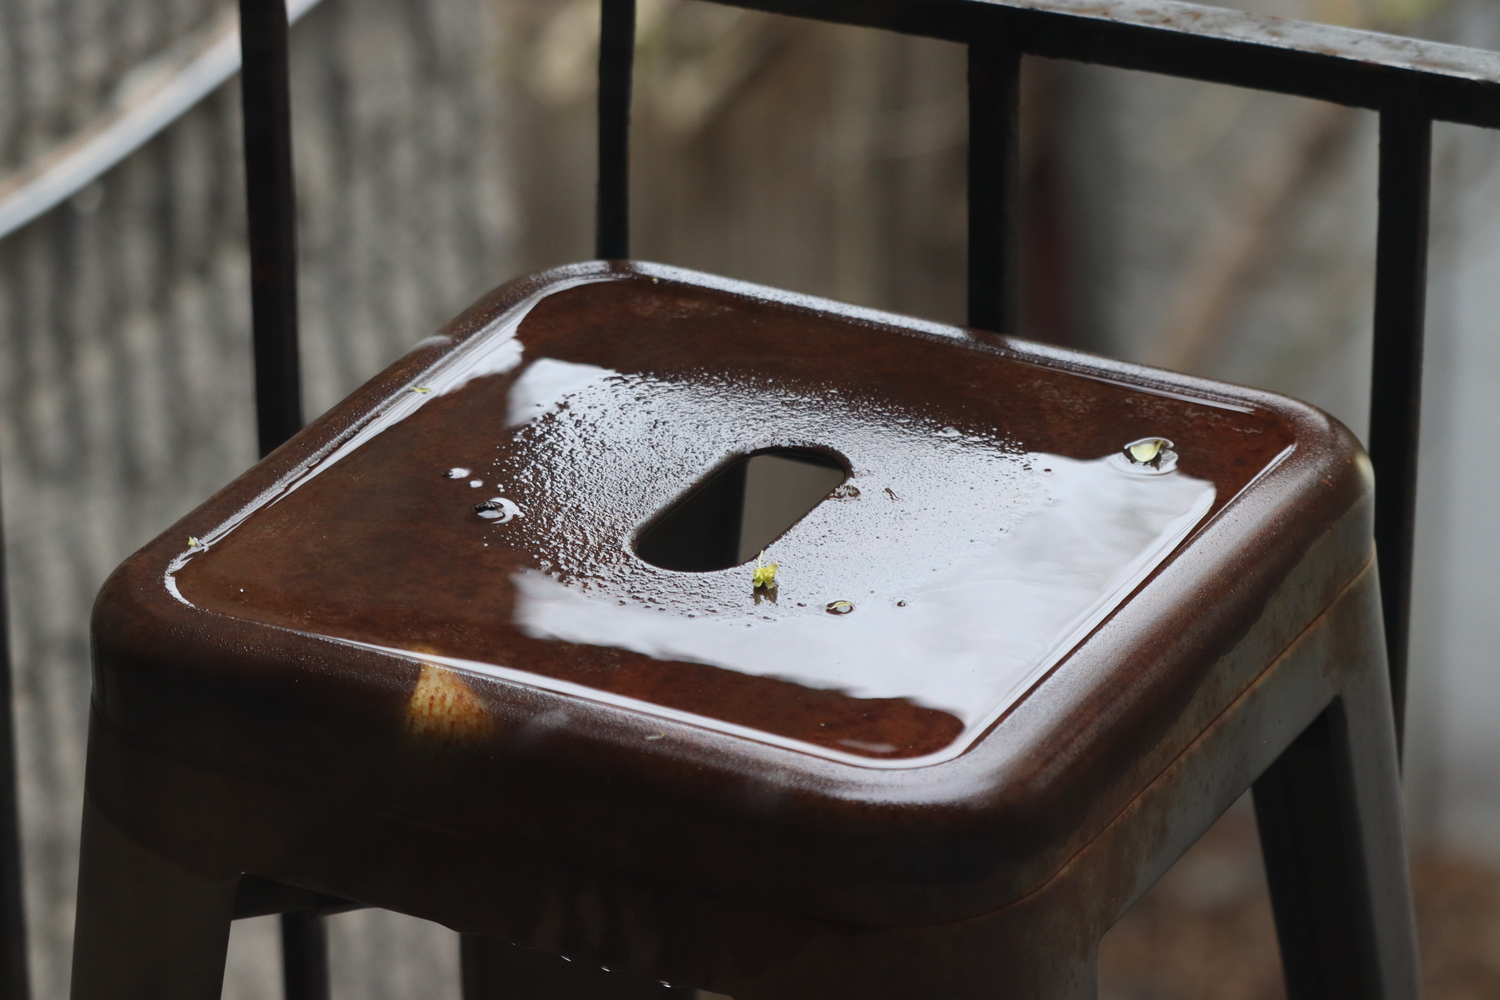 the seat of a rusted metal stool out in the way
with a shallow pool of water on it.
in the center is a handle-shaped hole,
which is raised slightly,
causing the water to pool further
around the edges.
there is a single fallen light green tree bud
just near the hole.